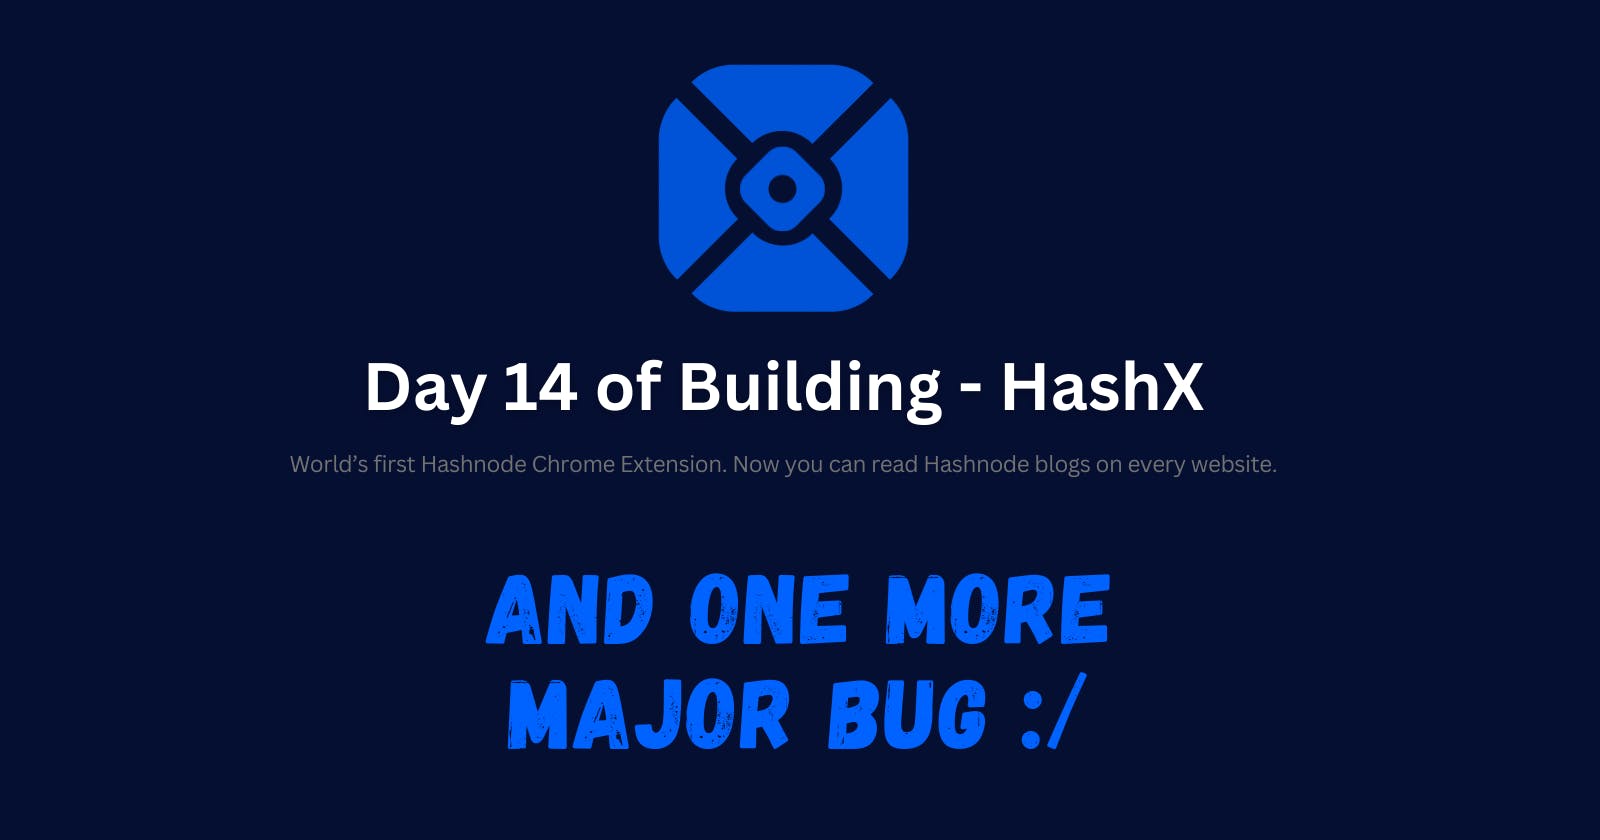 Day 14 - And one more major bug :/